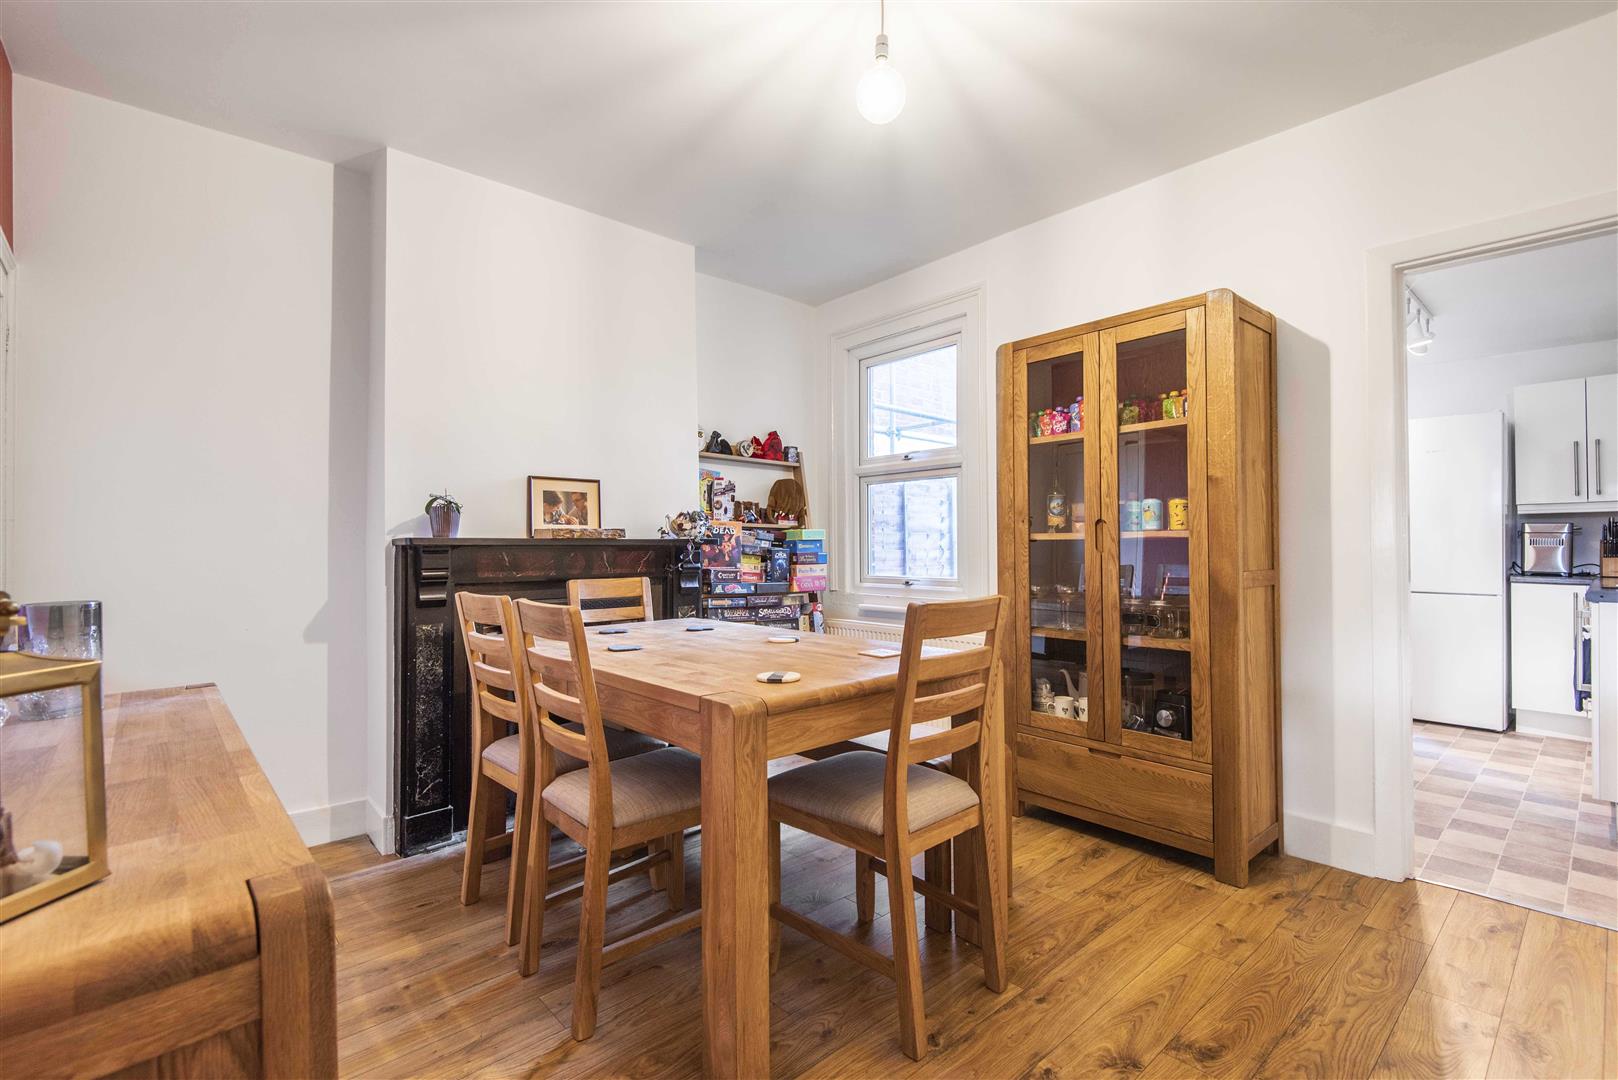 Gosbrook Road Caversham house for sale in Reading